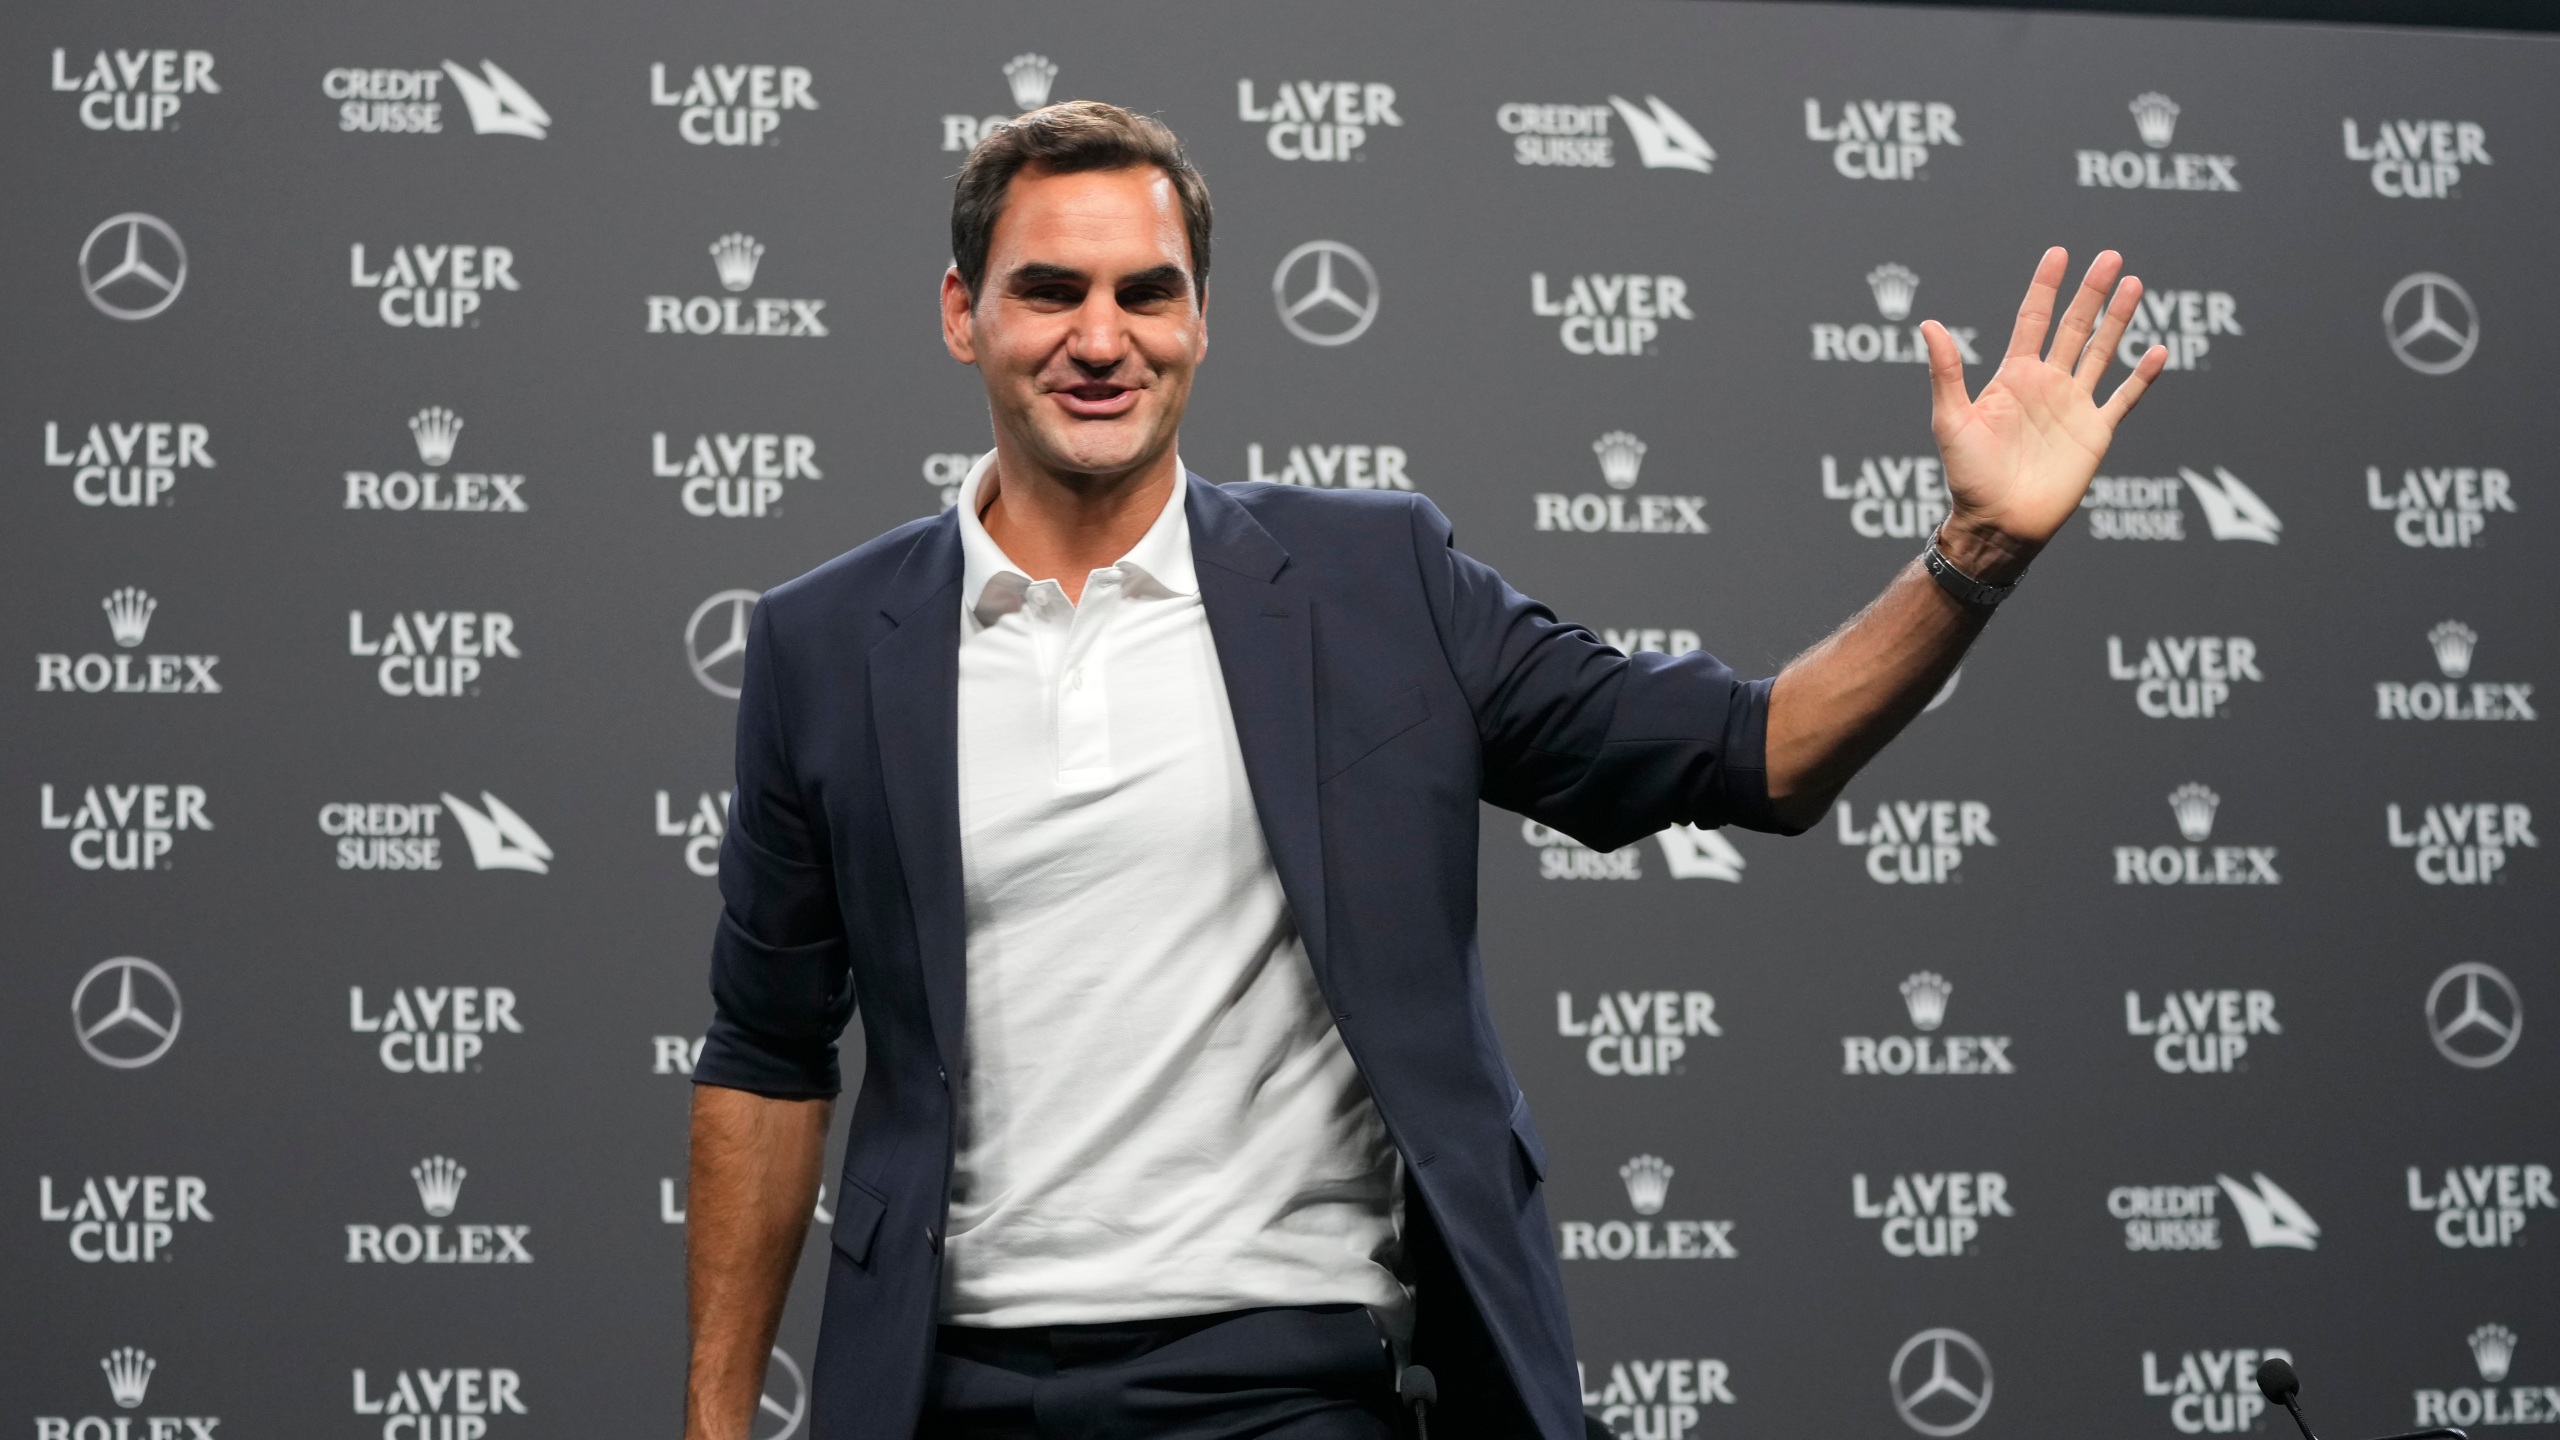 Roger Federer's Goodbye Will Be In Doubles, Maybe With Nadal